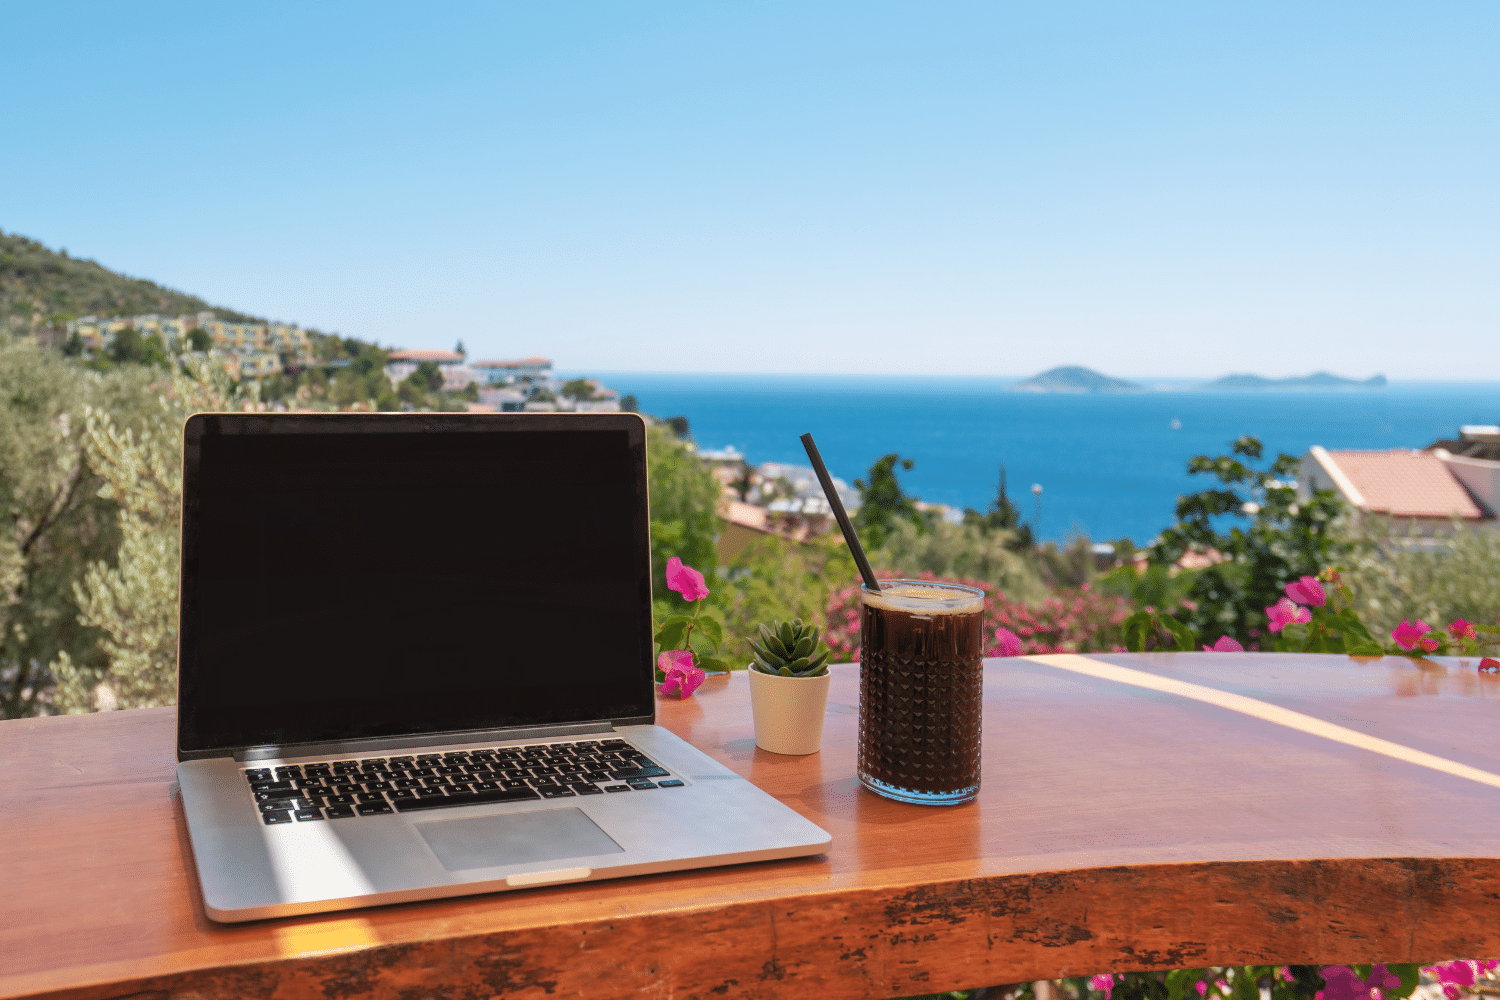 what are the risks of remote work?